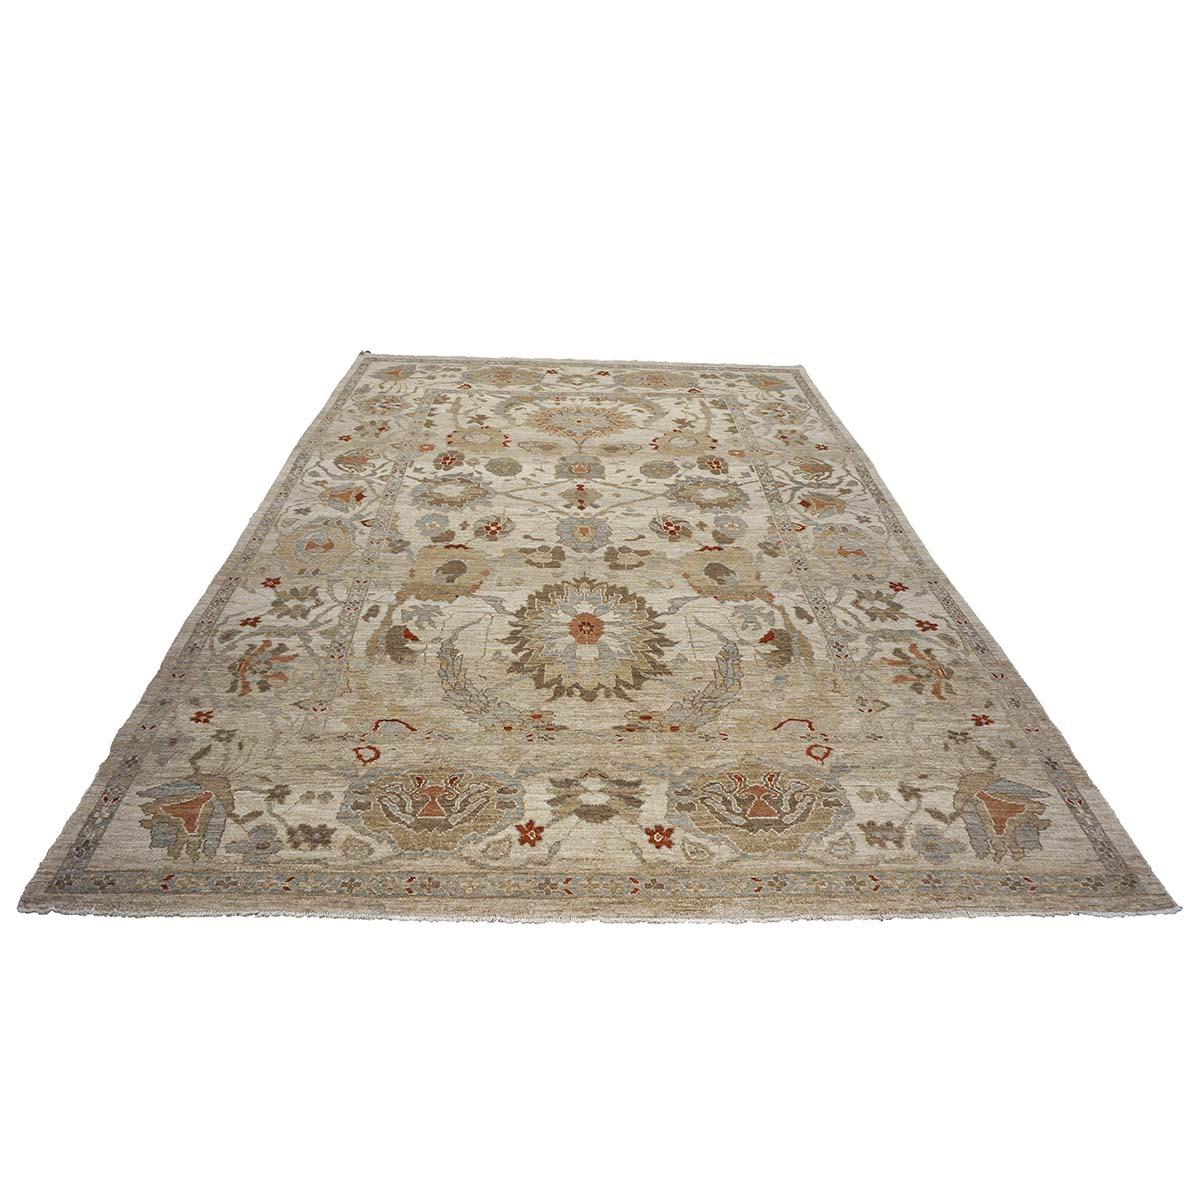 Contemporary 21st Century Persian Sultanabad 9x12 Ivory, Blue & Tan Handmade Area Rug For Sale